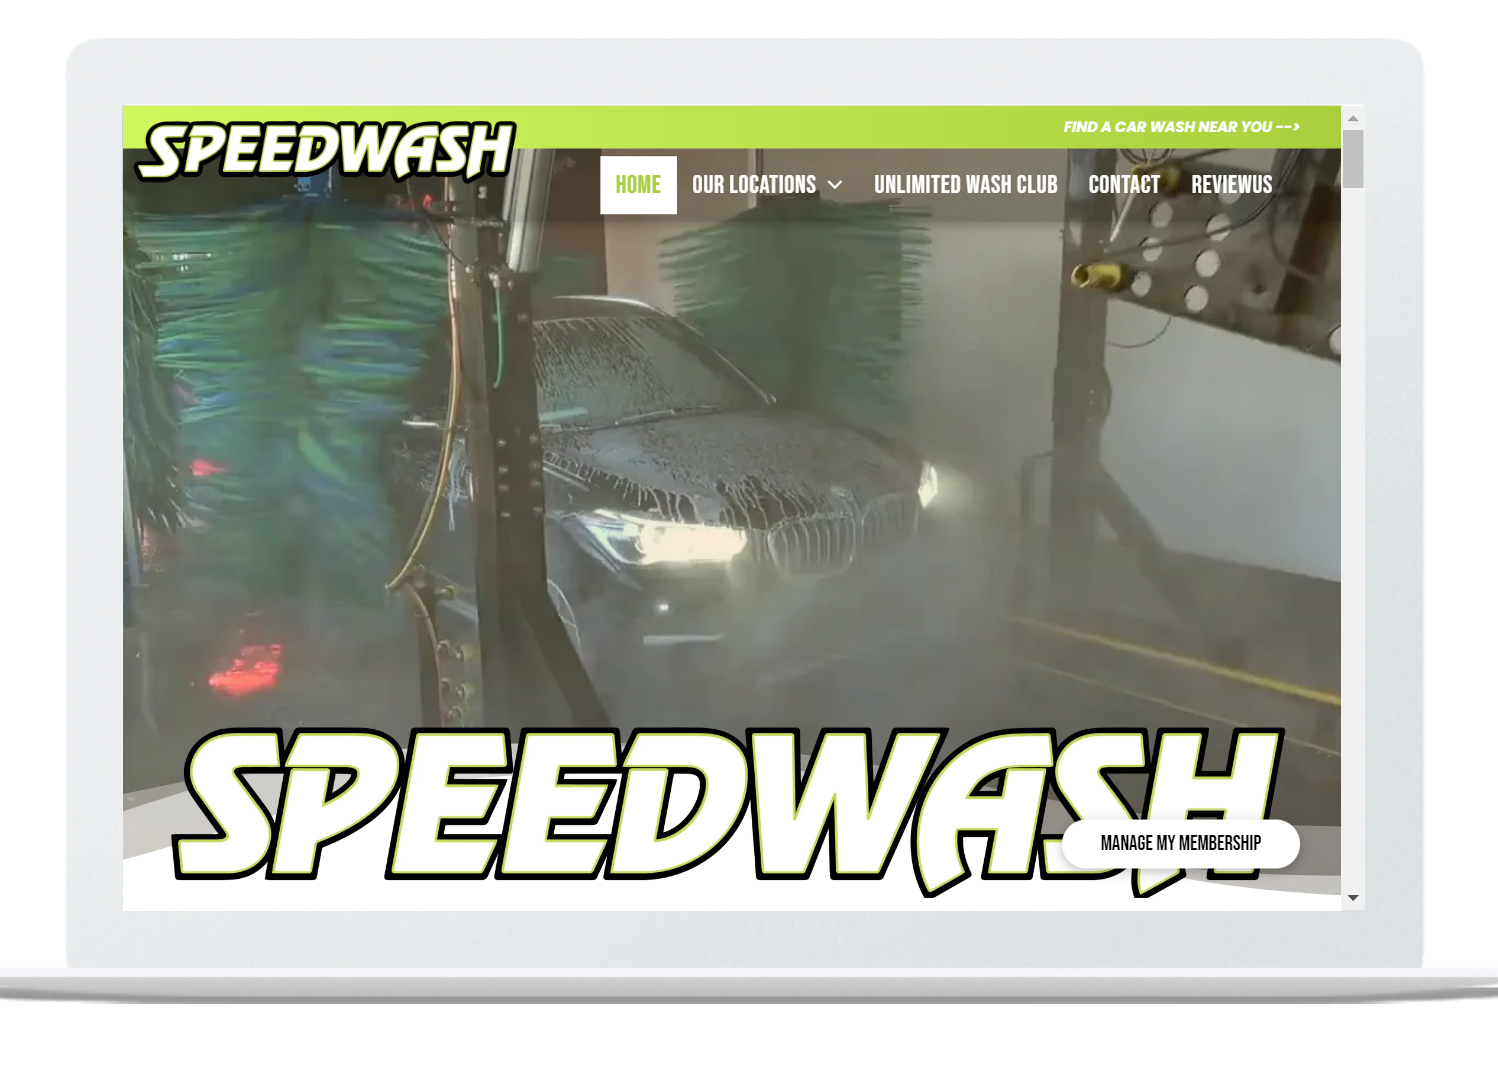 Seven-location express CARwash website for Los Angeles California carwash websites made by OhmCo, the best carwash websites in the wash and water treatment industry